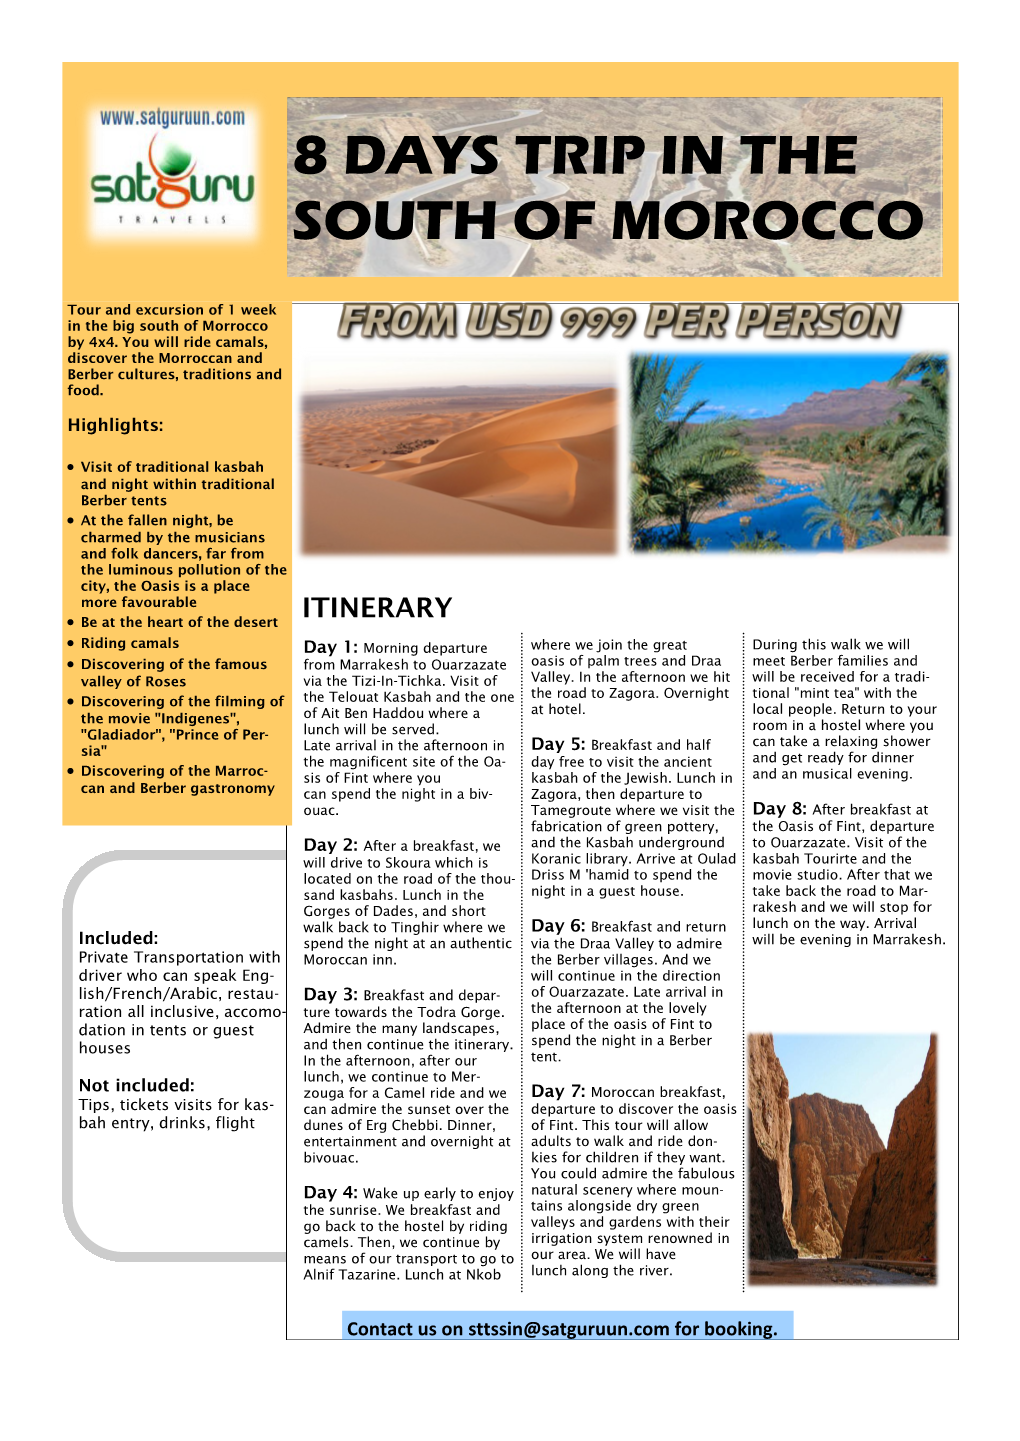 8 Days Trip in the South of Morocco